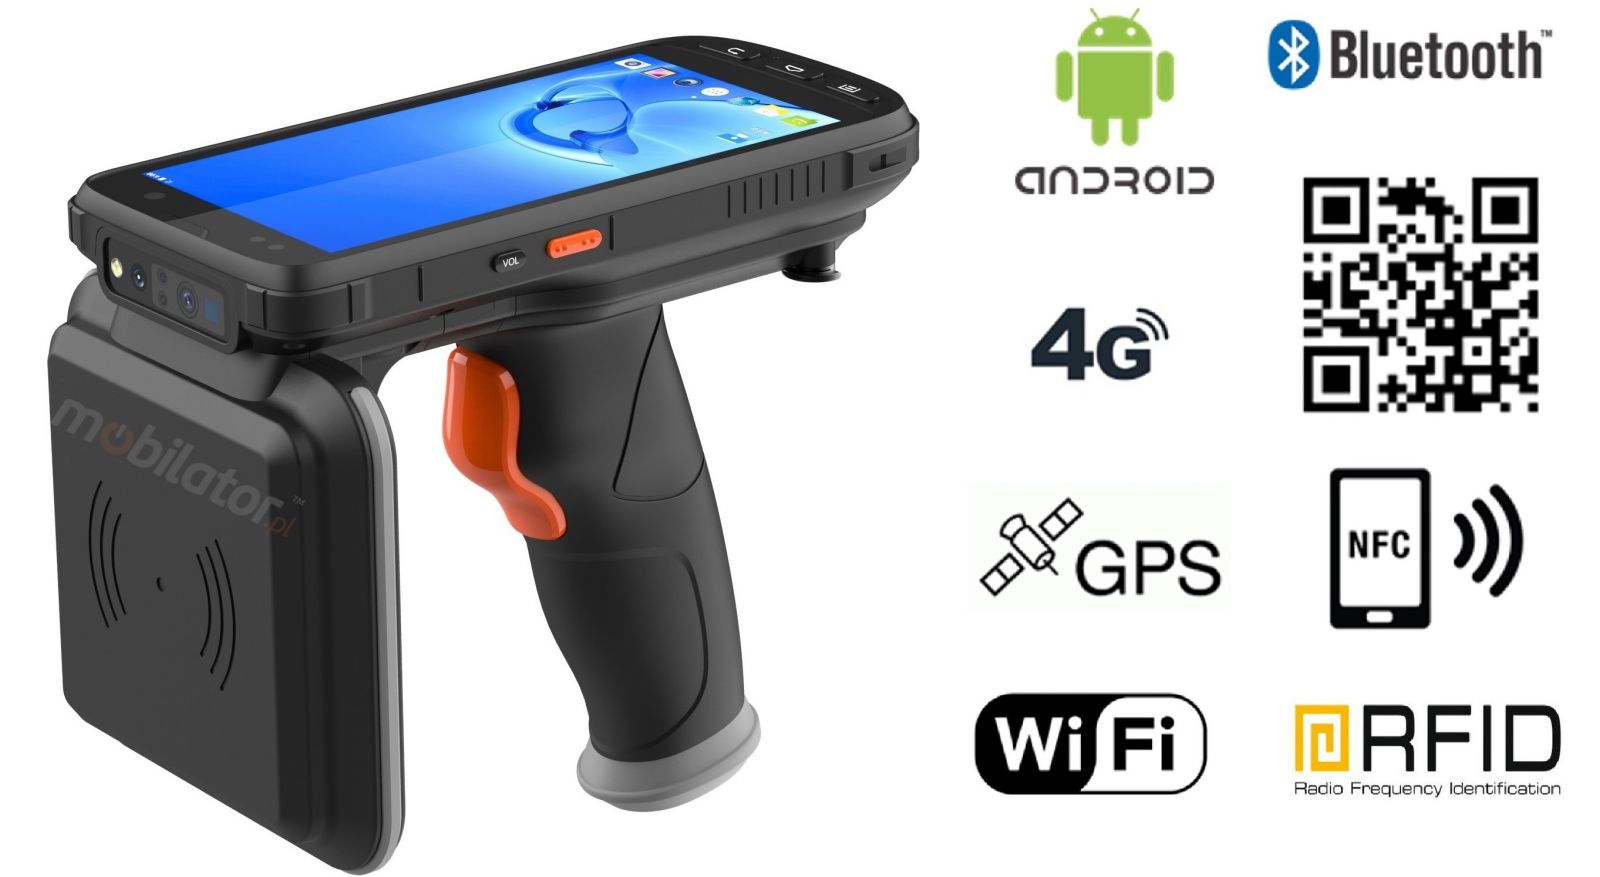 MobiPad XX-B6 v.9 - Industrial data collector (IP65) with a 2D code scanner (Zebra SE4710) and NFC + 4G LTE + Bluetooth + WiFi + UHF 18m + Pistol Grip 